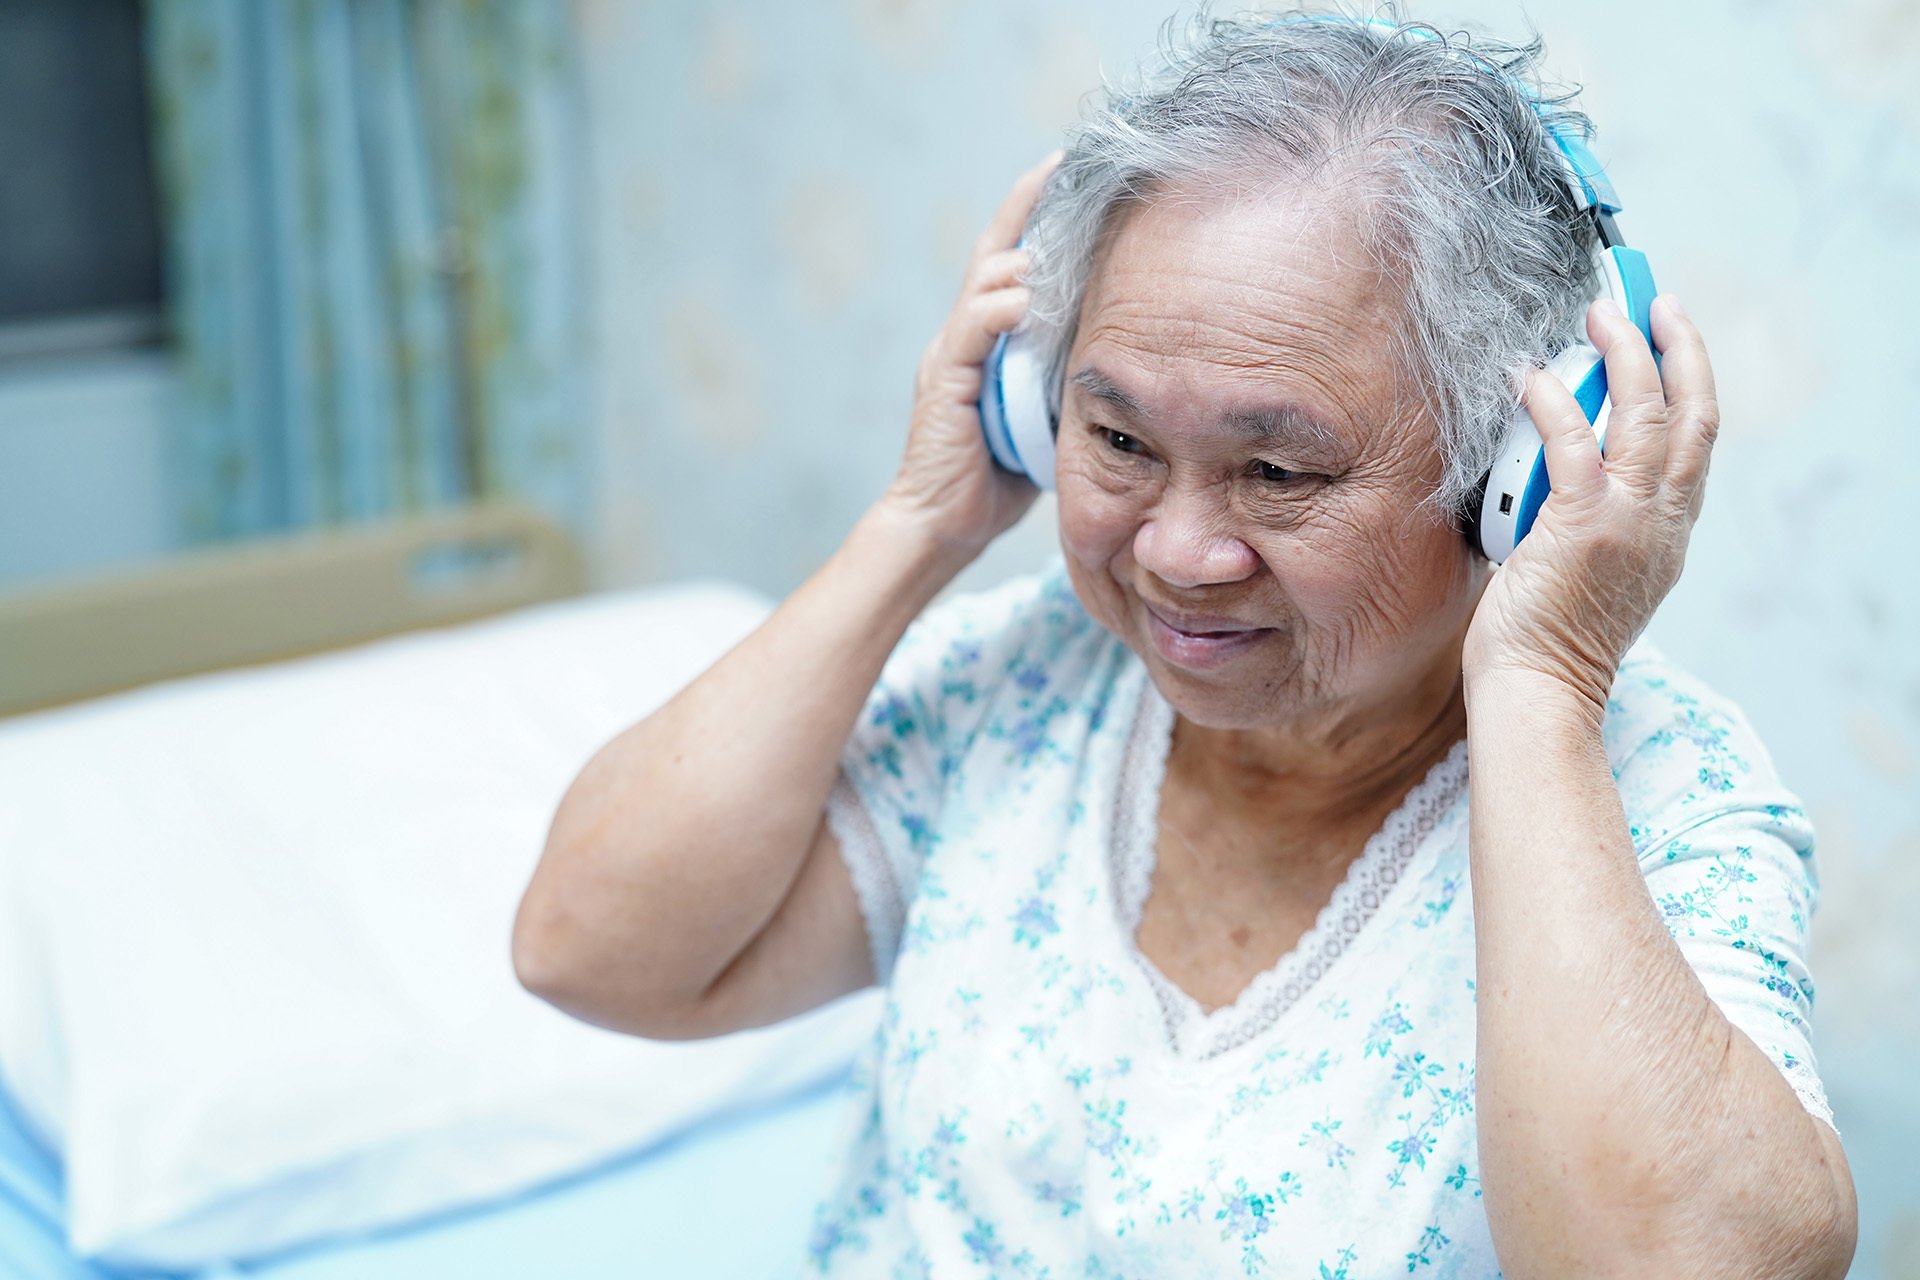 Listening to music improves symptoms of dementia 